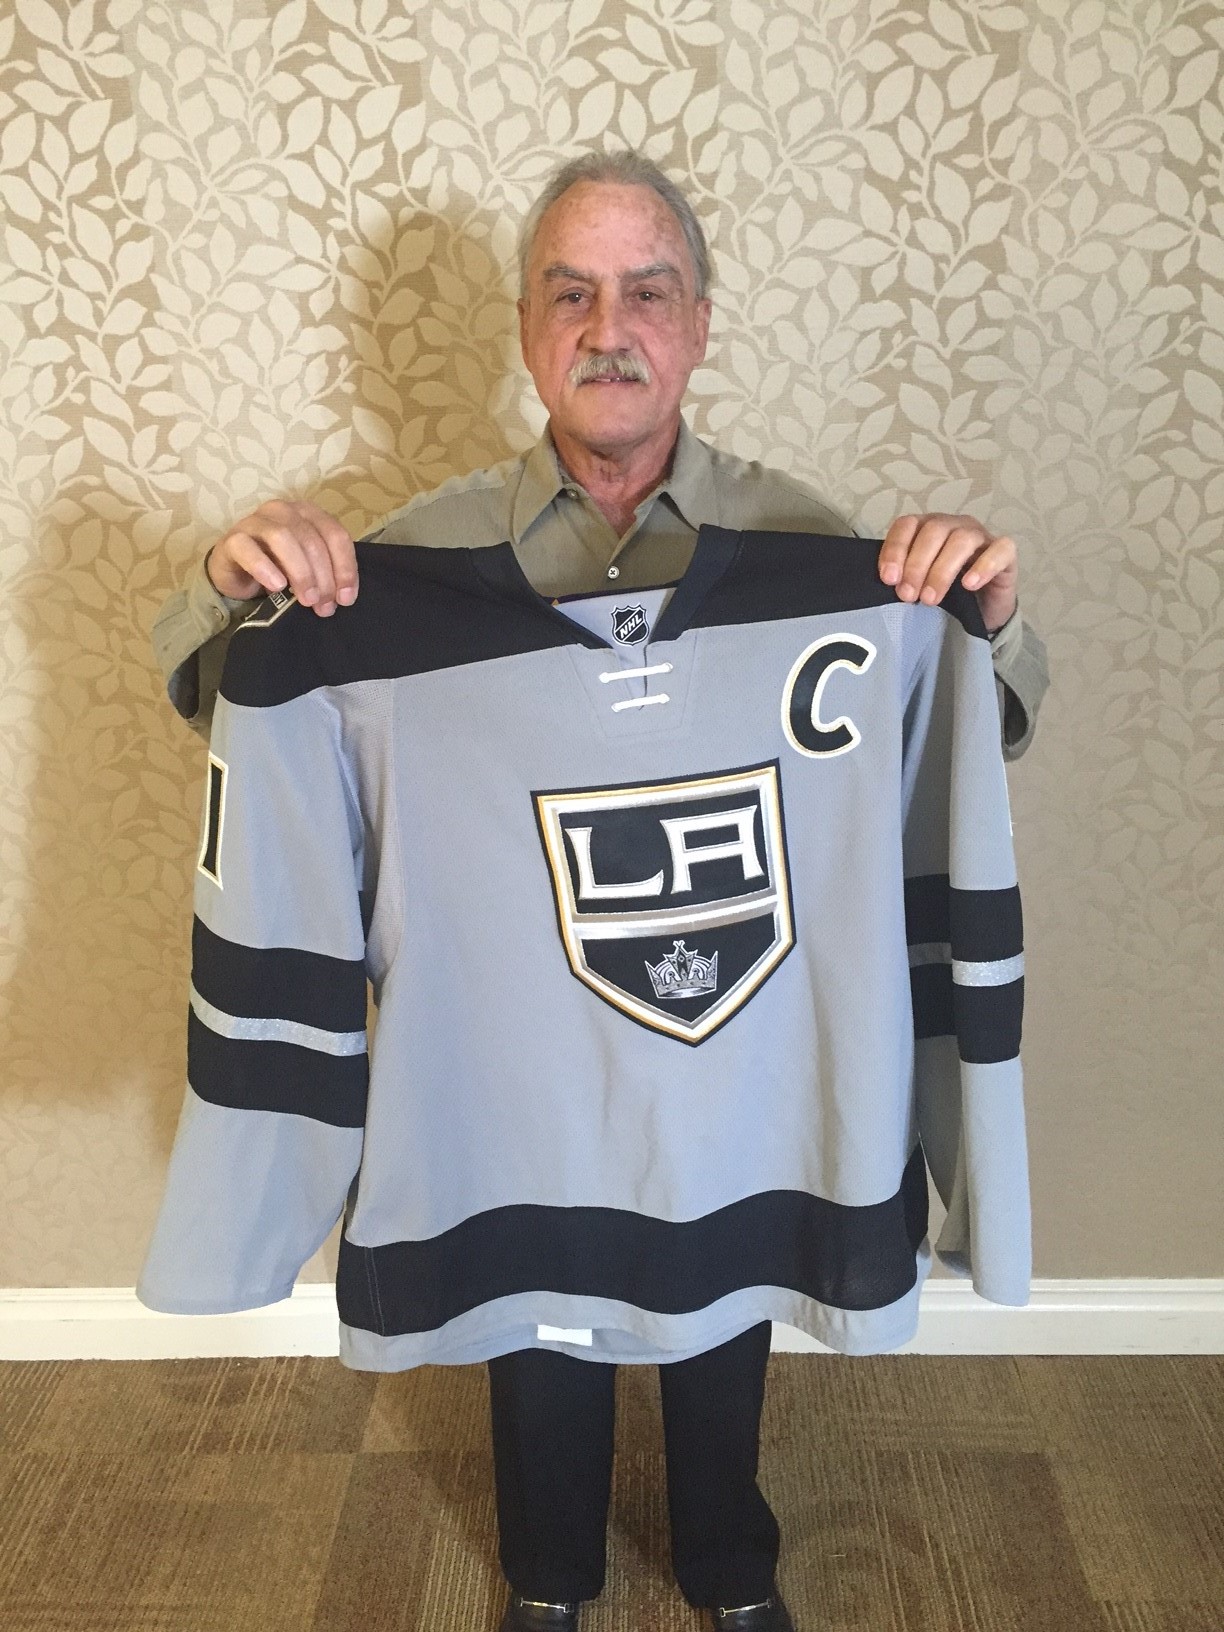 kings 50th anniversary jersey